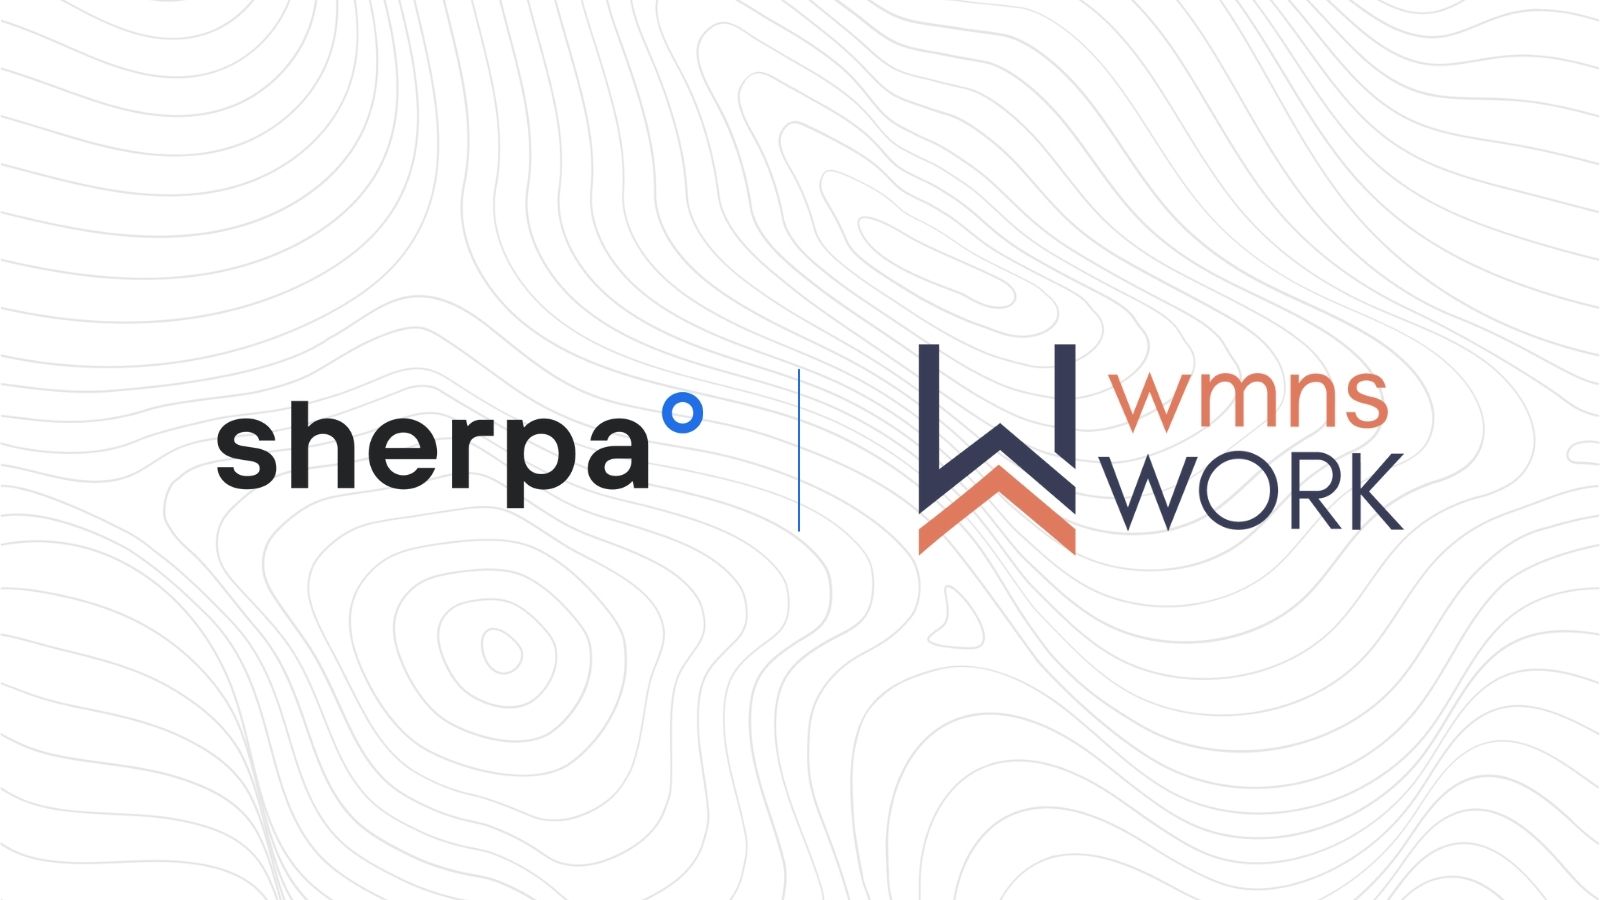 Announcing our founding sponsorship of wmnsWORK—a tourism startup accelerator for women and non-binary founders